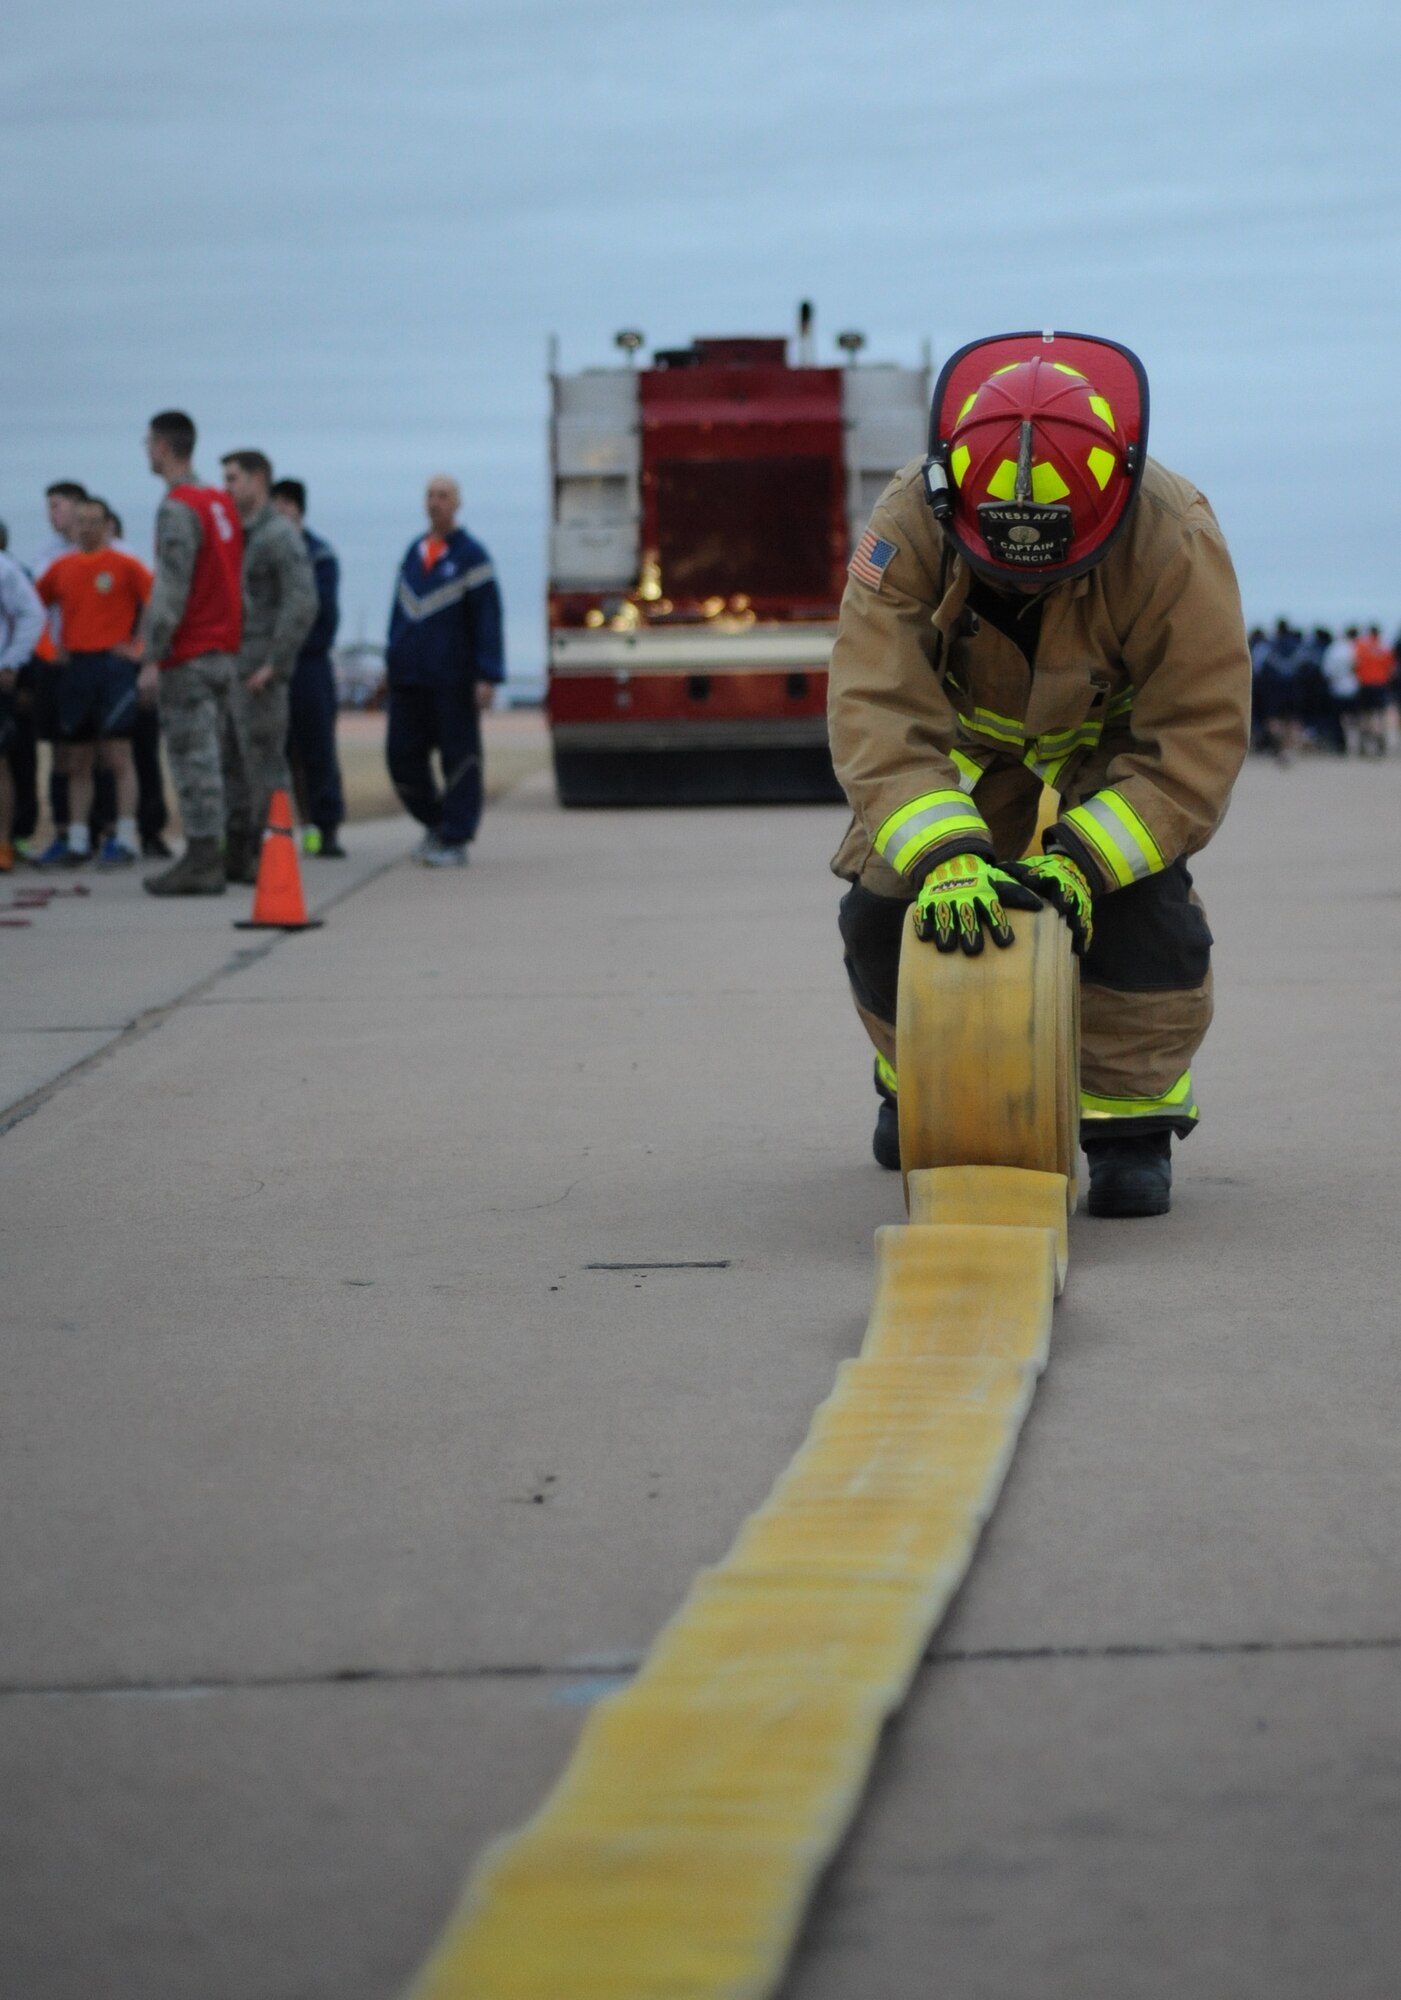 Martin Garcia, the 7th Civil Engineer Squadron lead firefighter, rolls up a fire hose during the Ray Rangel Remembrance Muster Feb. 13, 2017, at Dyess Air Force Base, Texas. Dyess Airmen participated in a firefighter geared workout to challenge the physical strength and endurance that is used during an emergency. (U.S. Air Force photo by Airman 1st Class Emily Copeland)